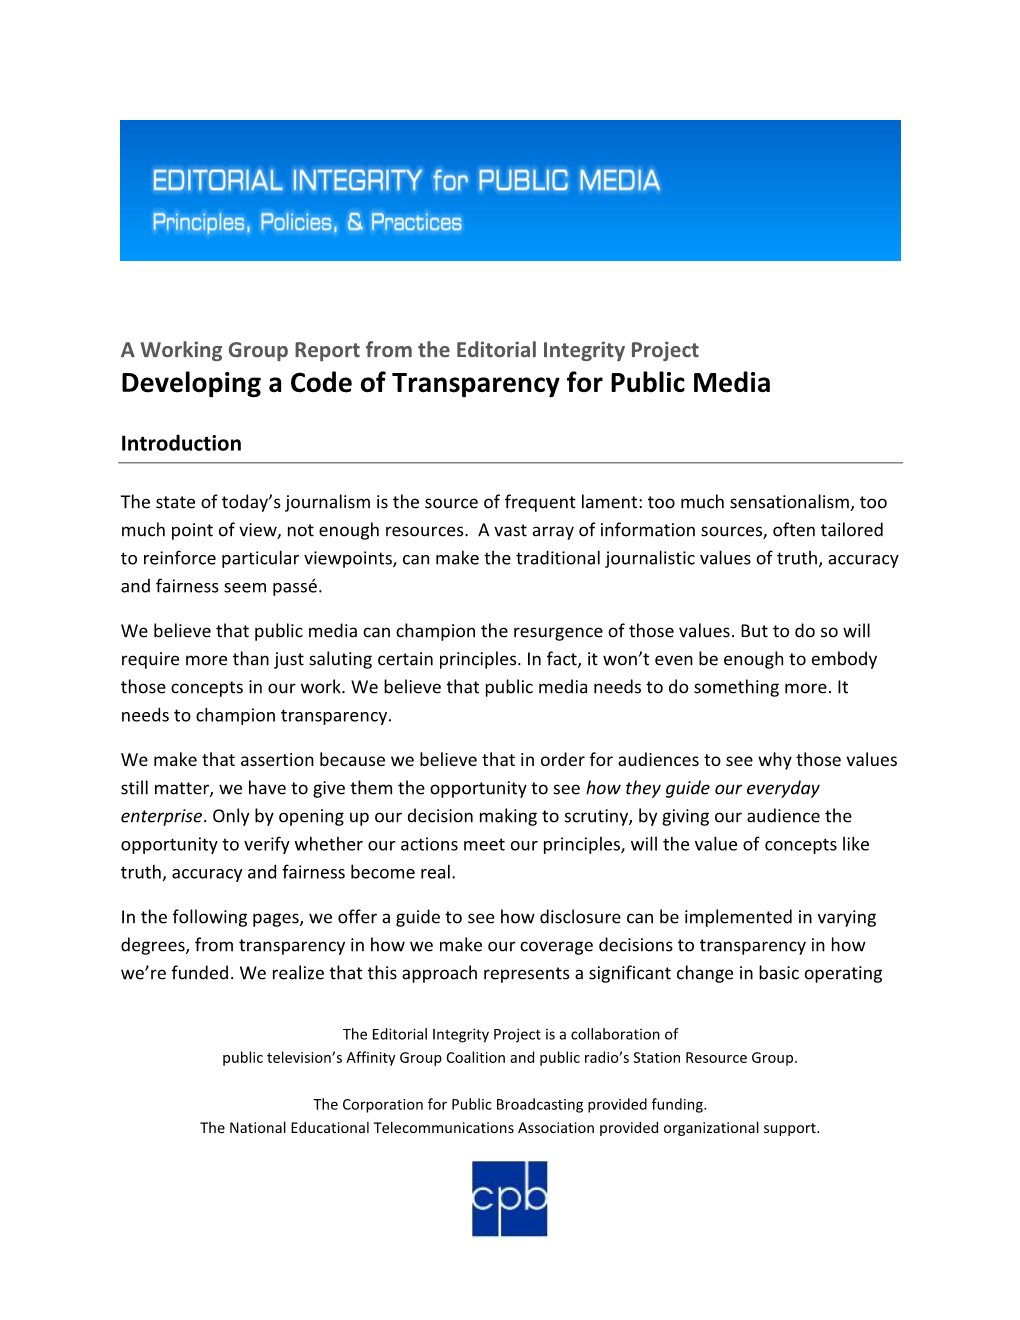 Developing a Code of Transparency for Public Media